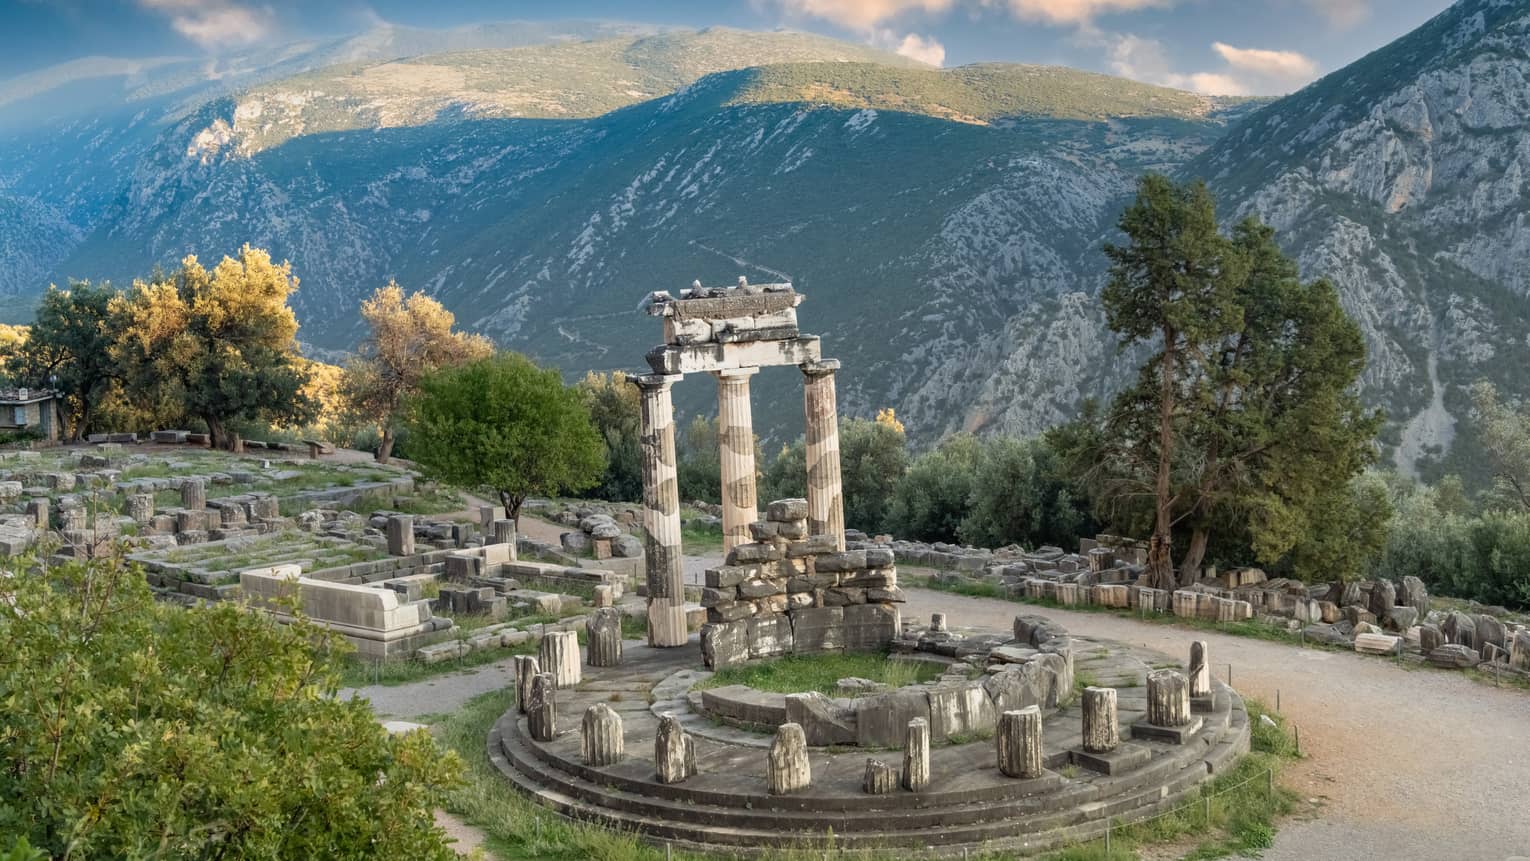 Greek ruins at a hill's edge next to massive green-dappled mountains, under a blue sky with wispy, orange-tinted clouds. 